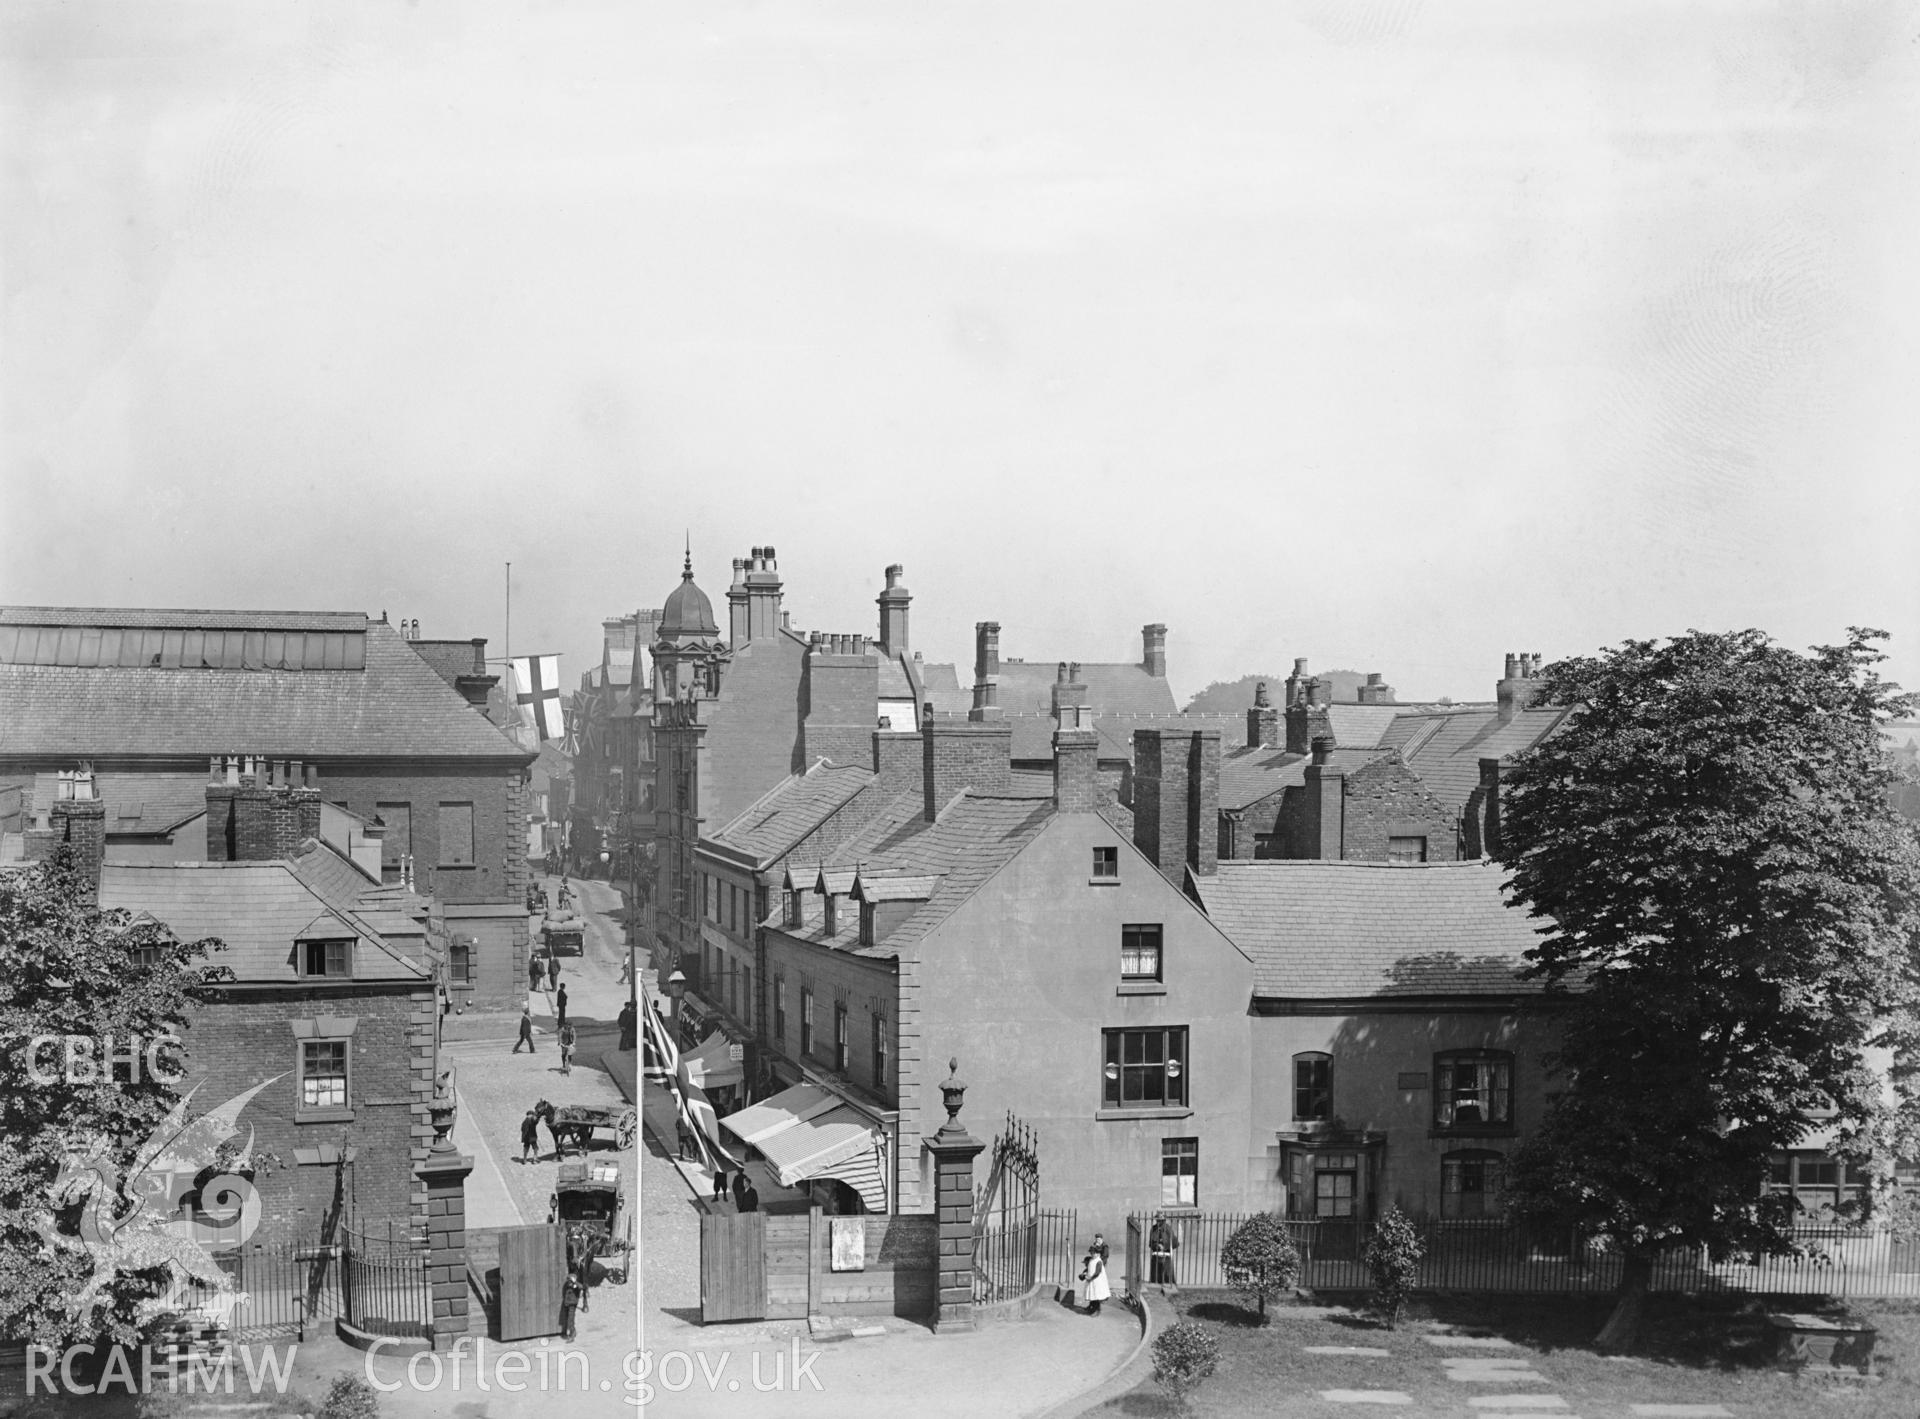 Black and white photograph showing Wrexham, looking from the church tower